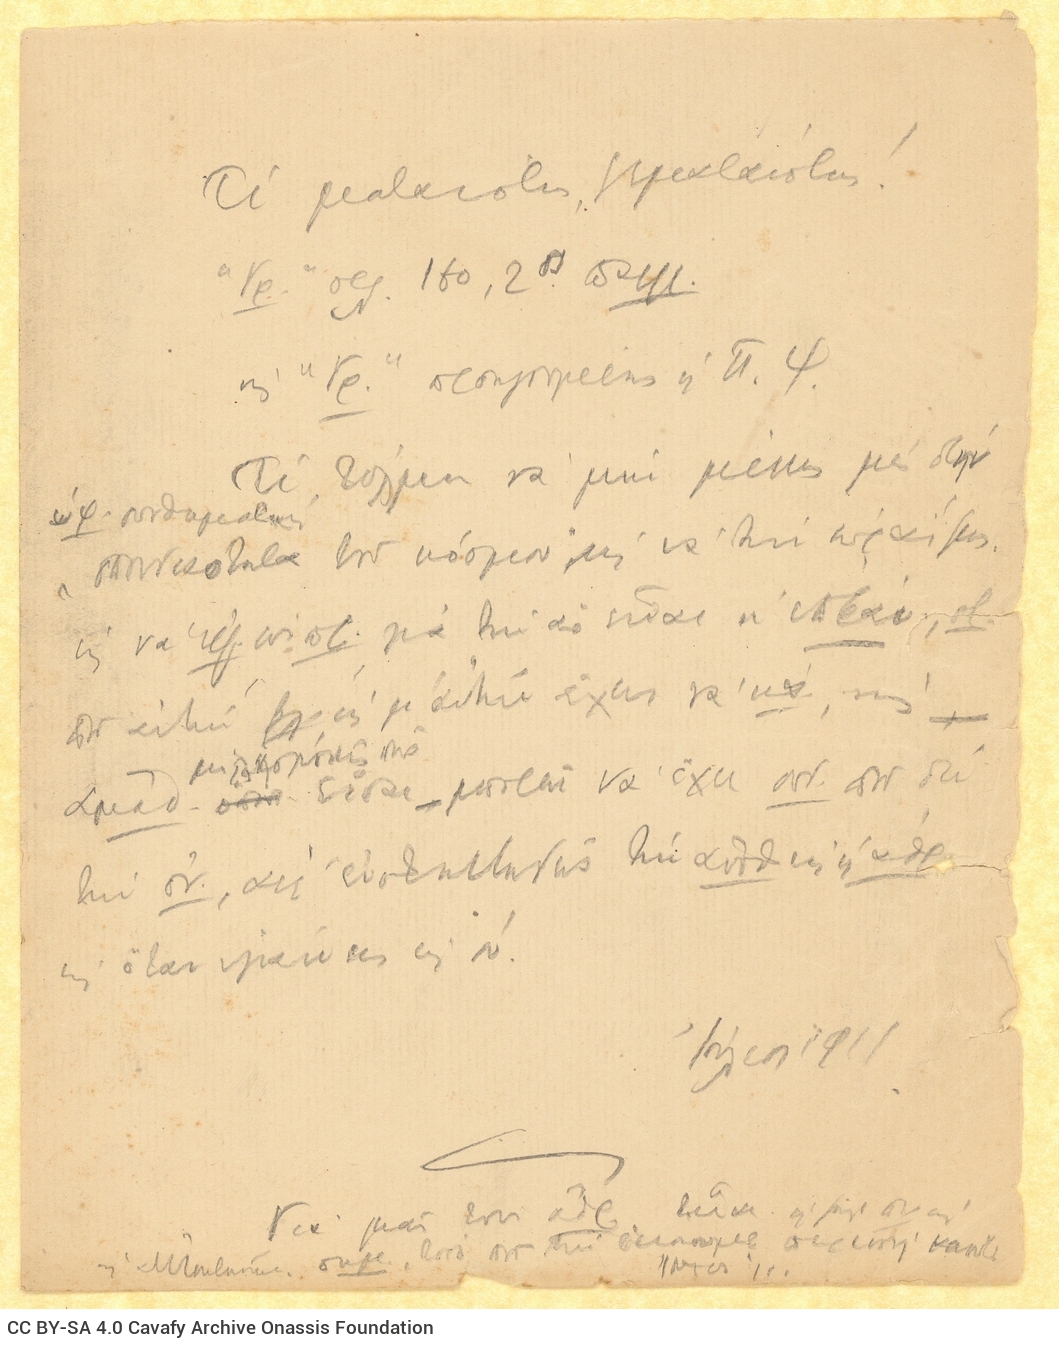 Handwritten note on one side of a sheet with bibliographical reference and extensive use of abbreviations. Date at bottom 